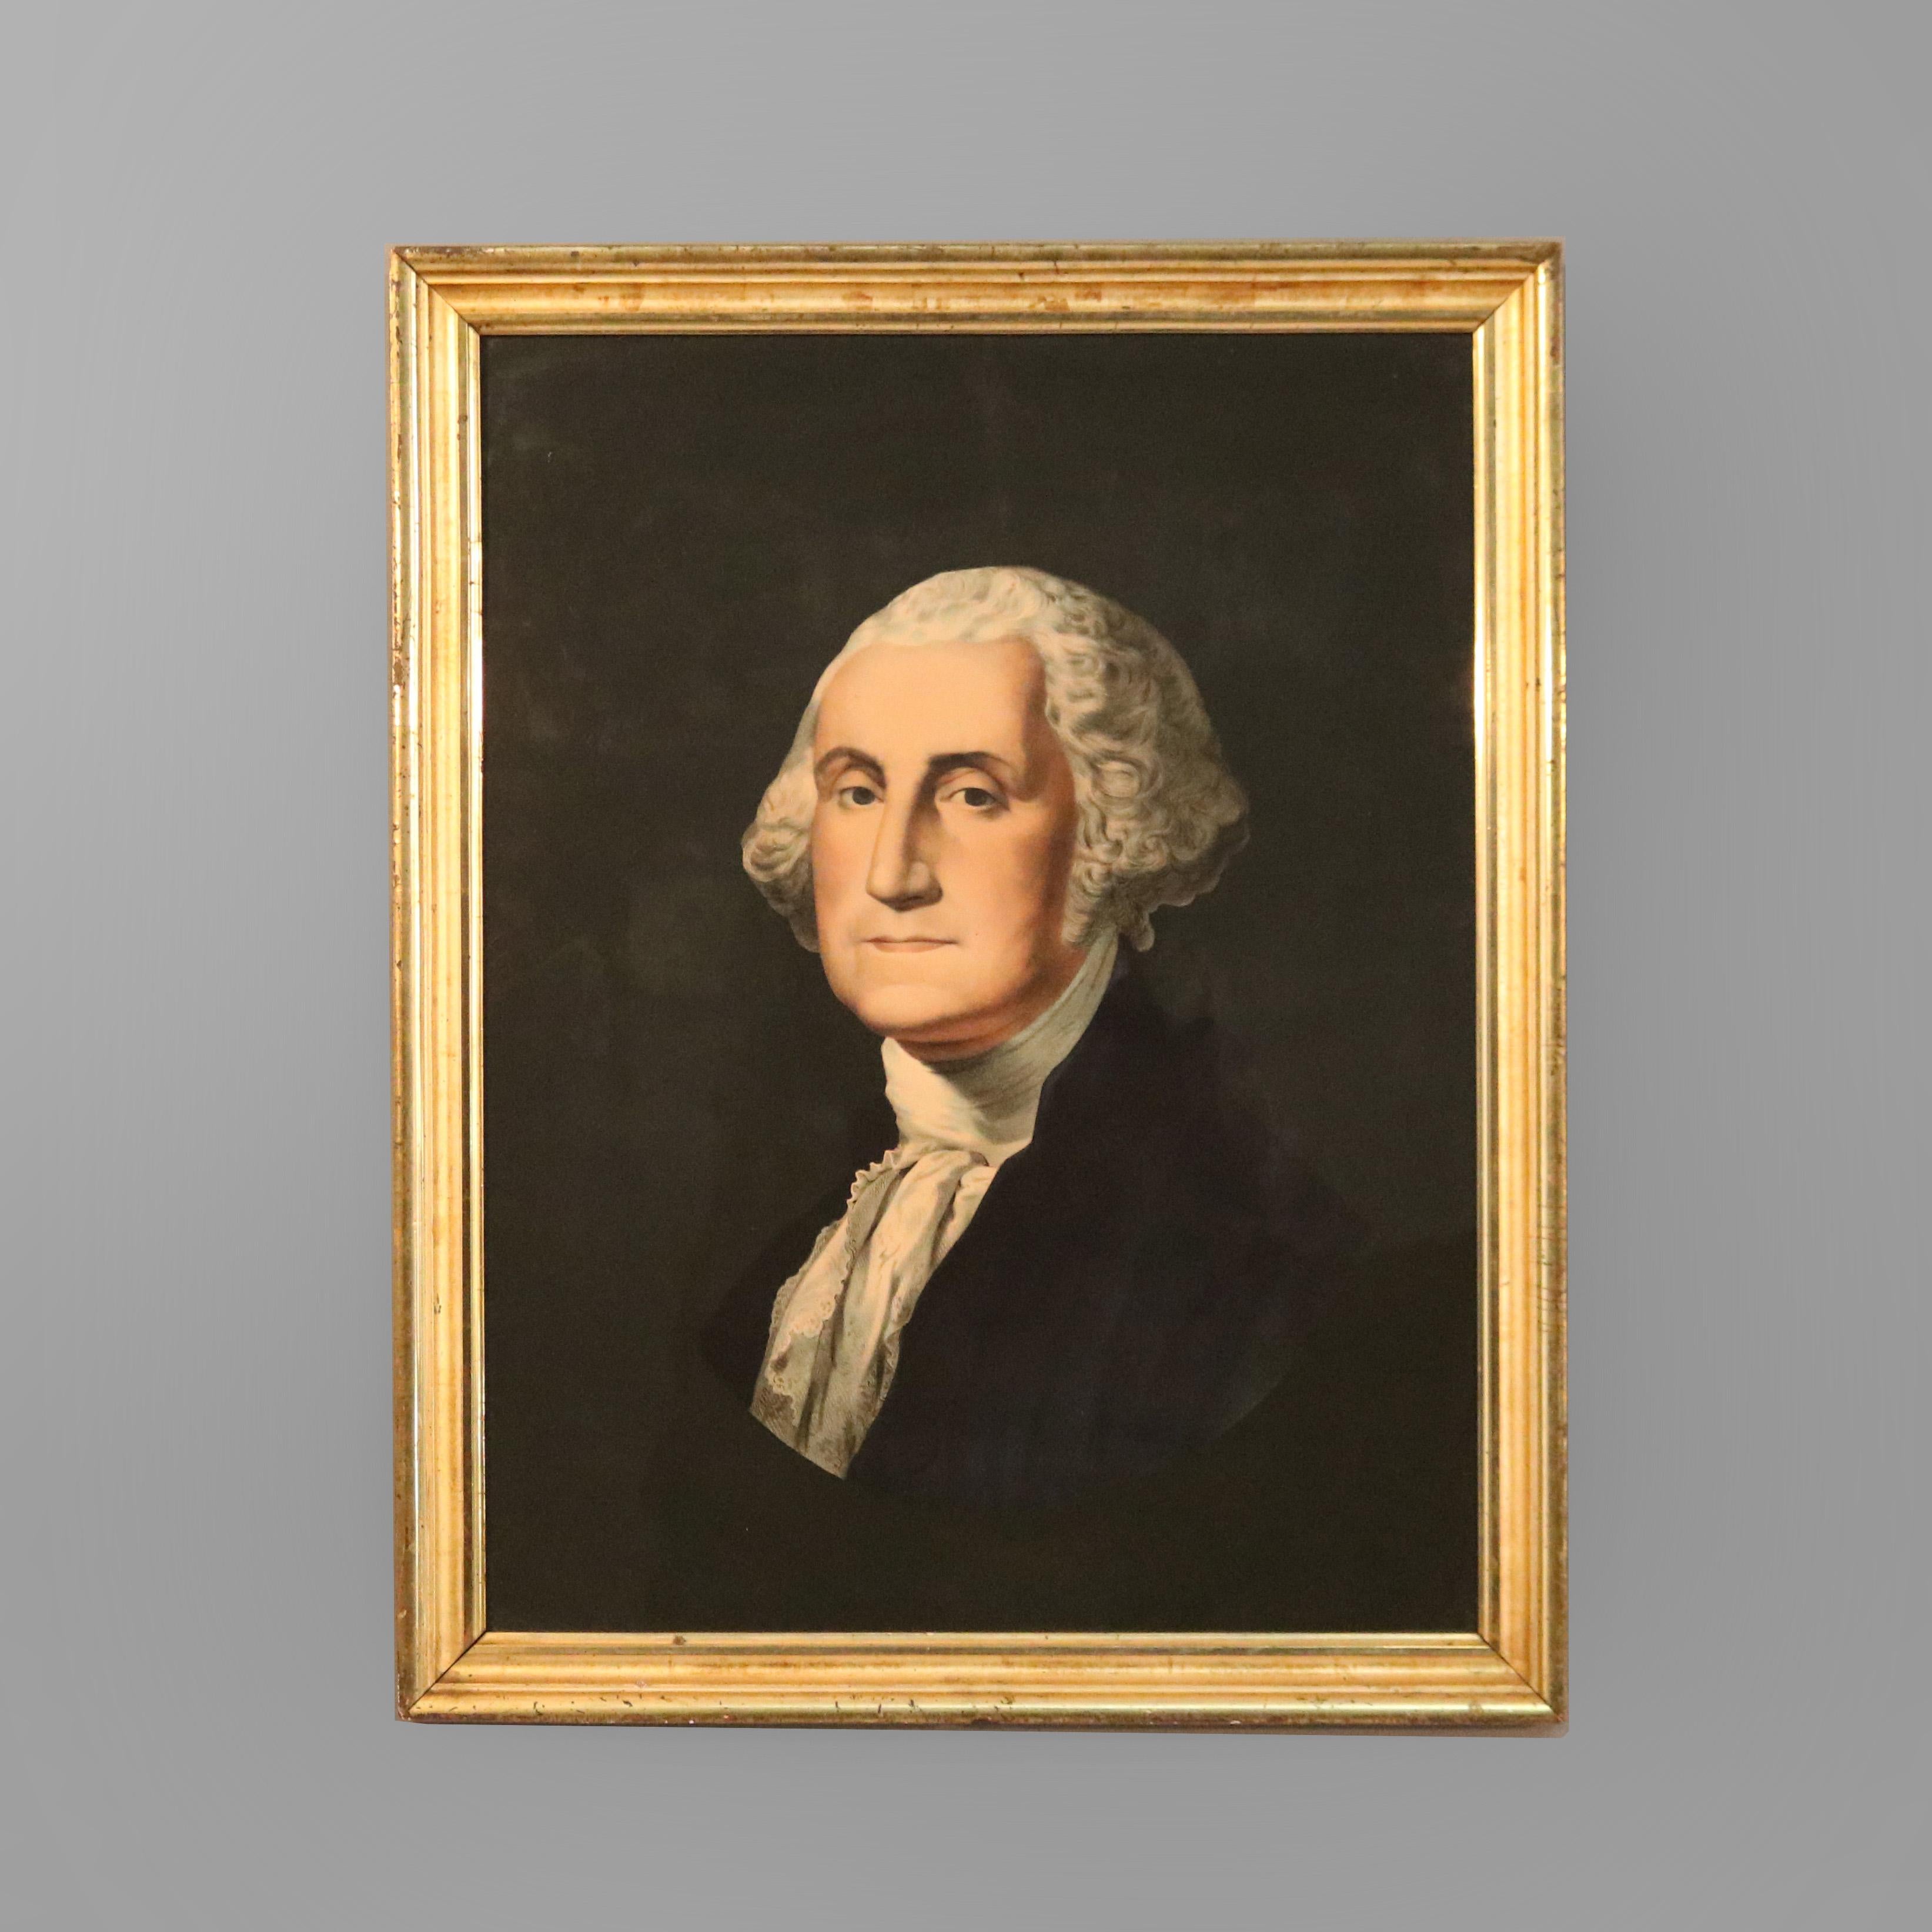 An antique lithograph on paper offers portrait President George Washington, seated in lemon gilt frame, c1860

Measures - overall 31''h x 24.5''w x 1.5